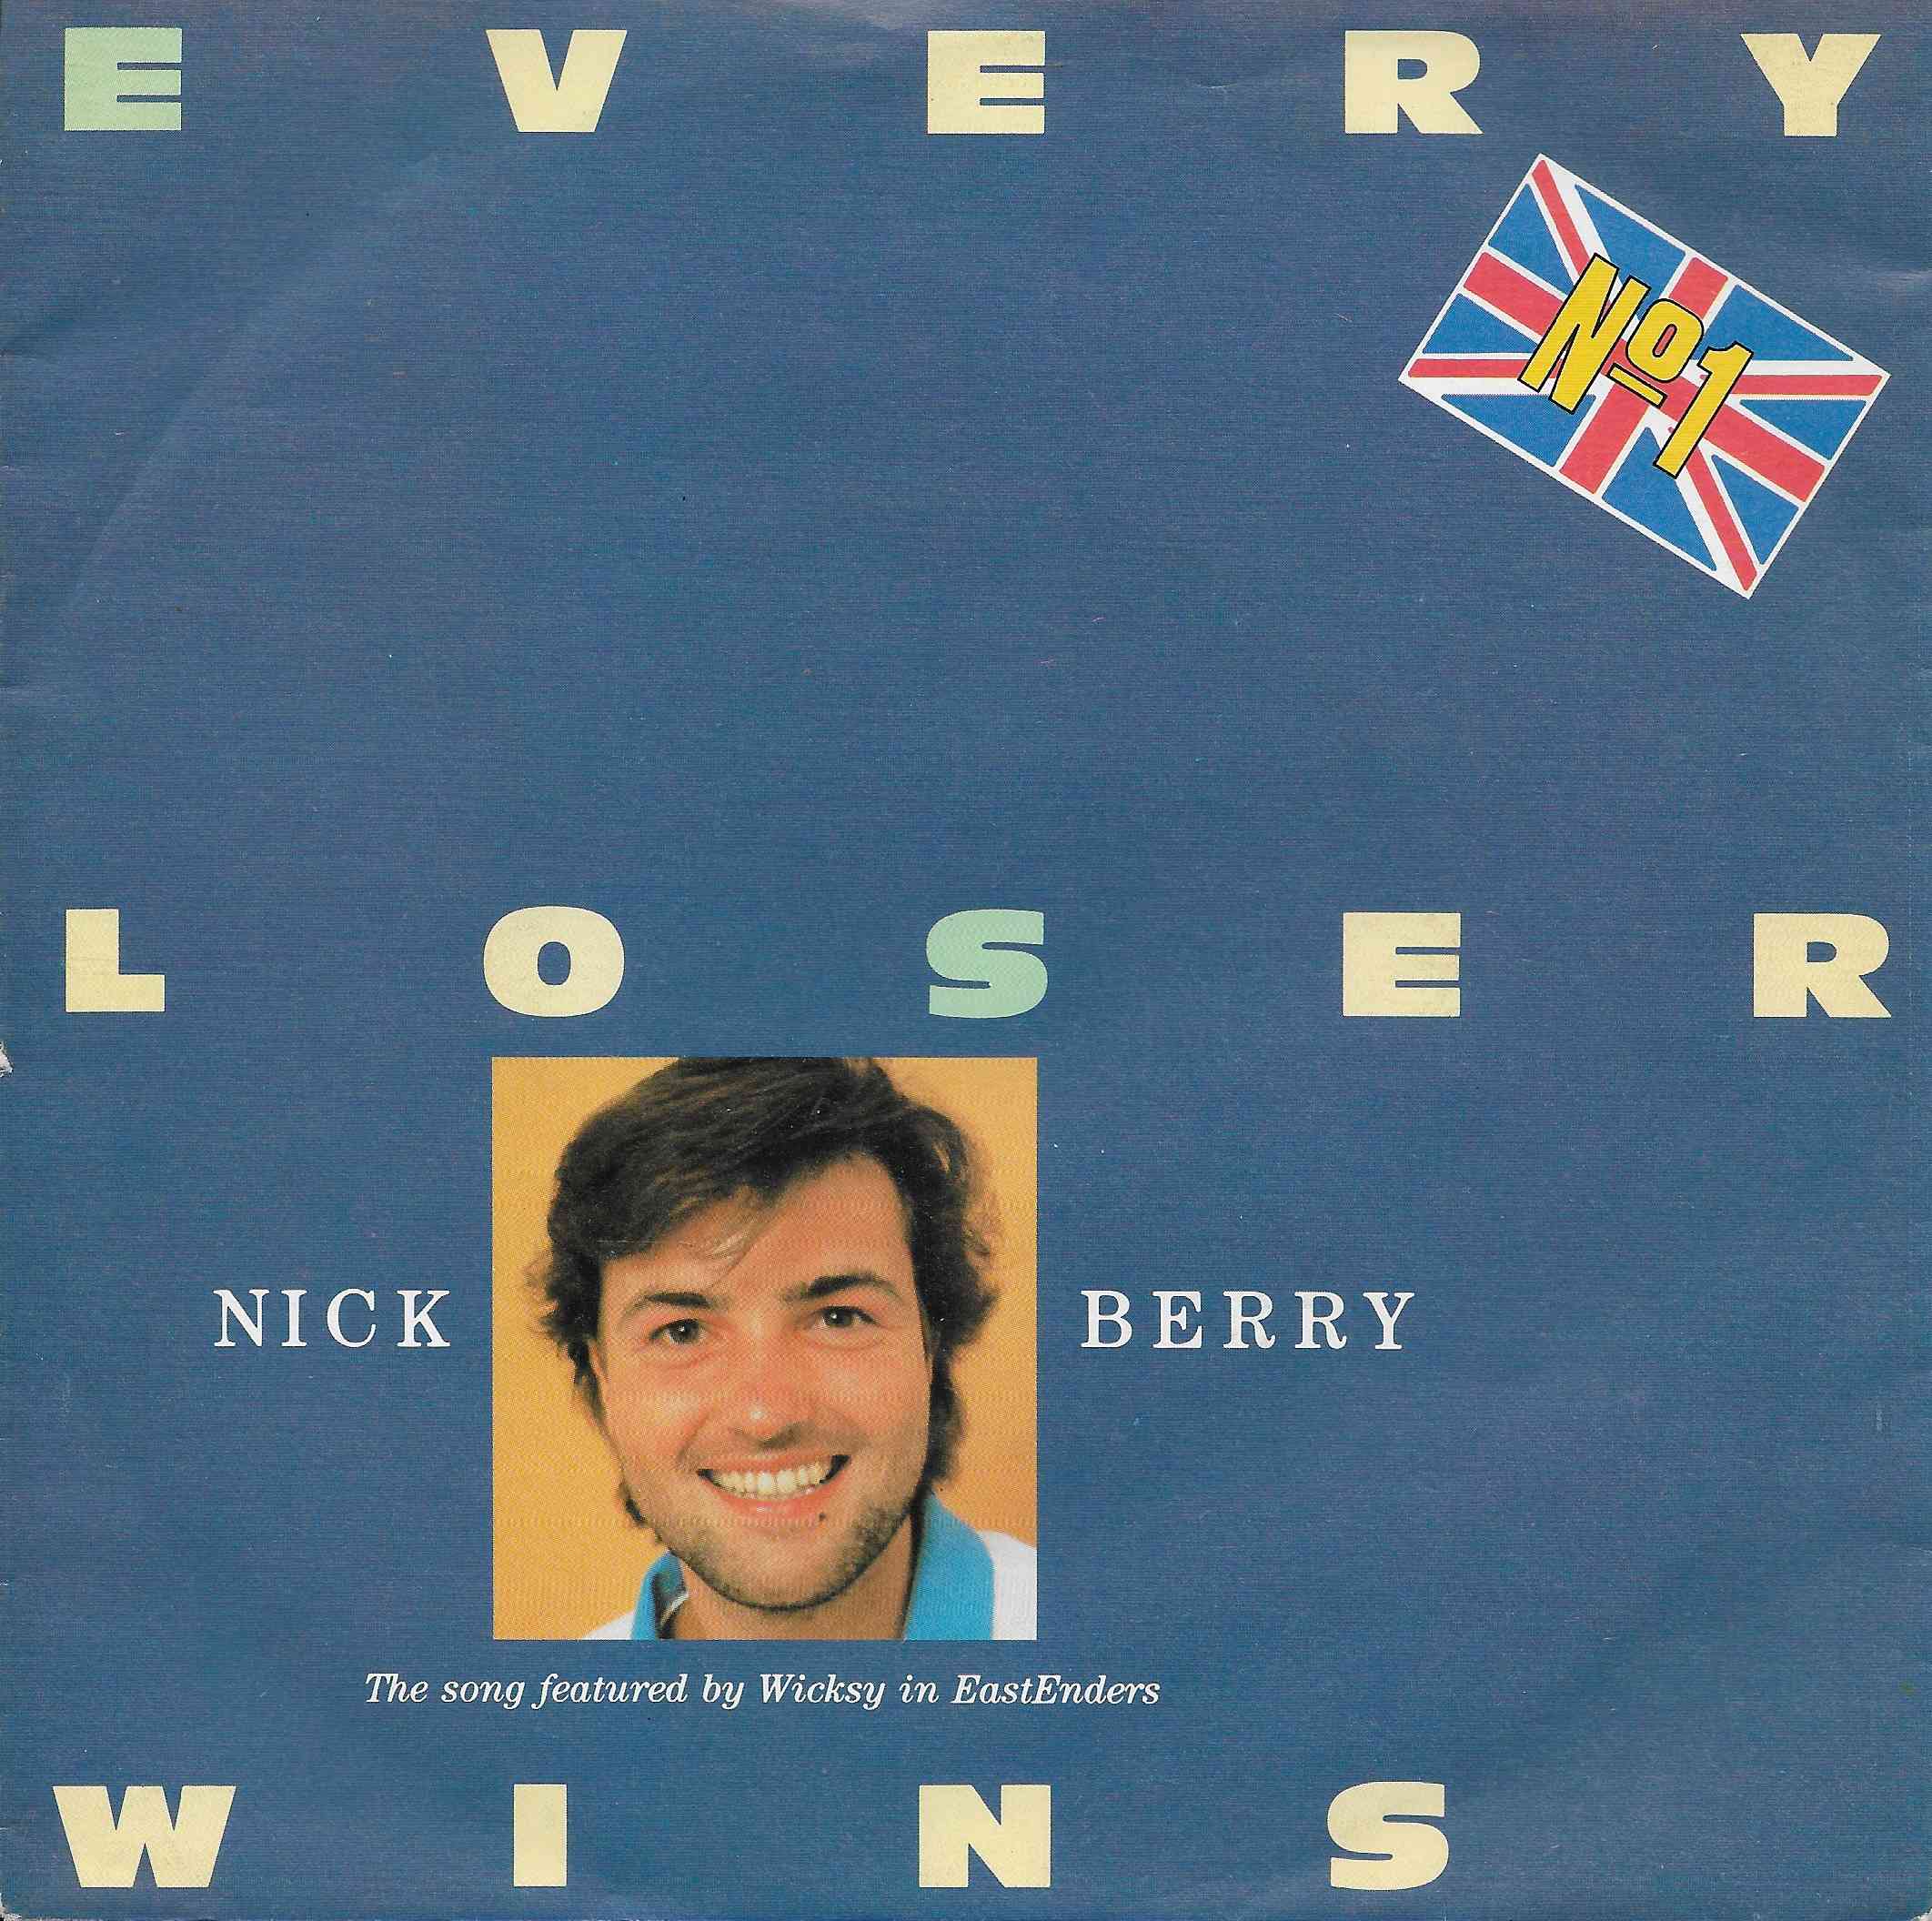 Picture of Every loser wins by artist Simon May / Stewart and Bradley James from the BBC singles - Records and Tapes library